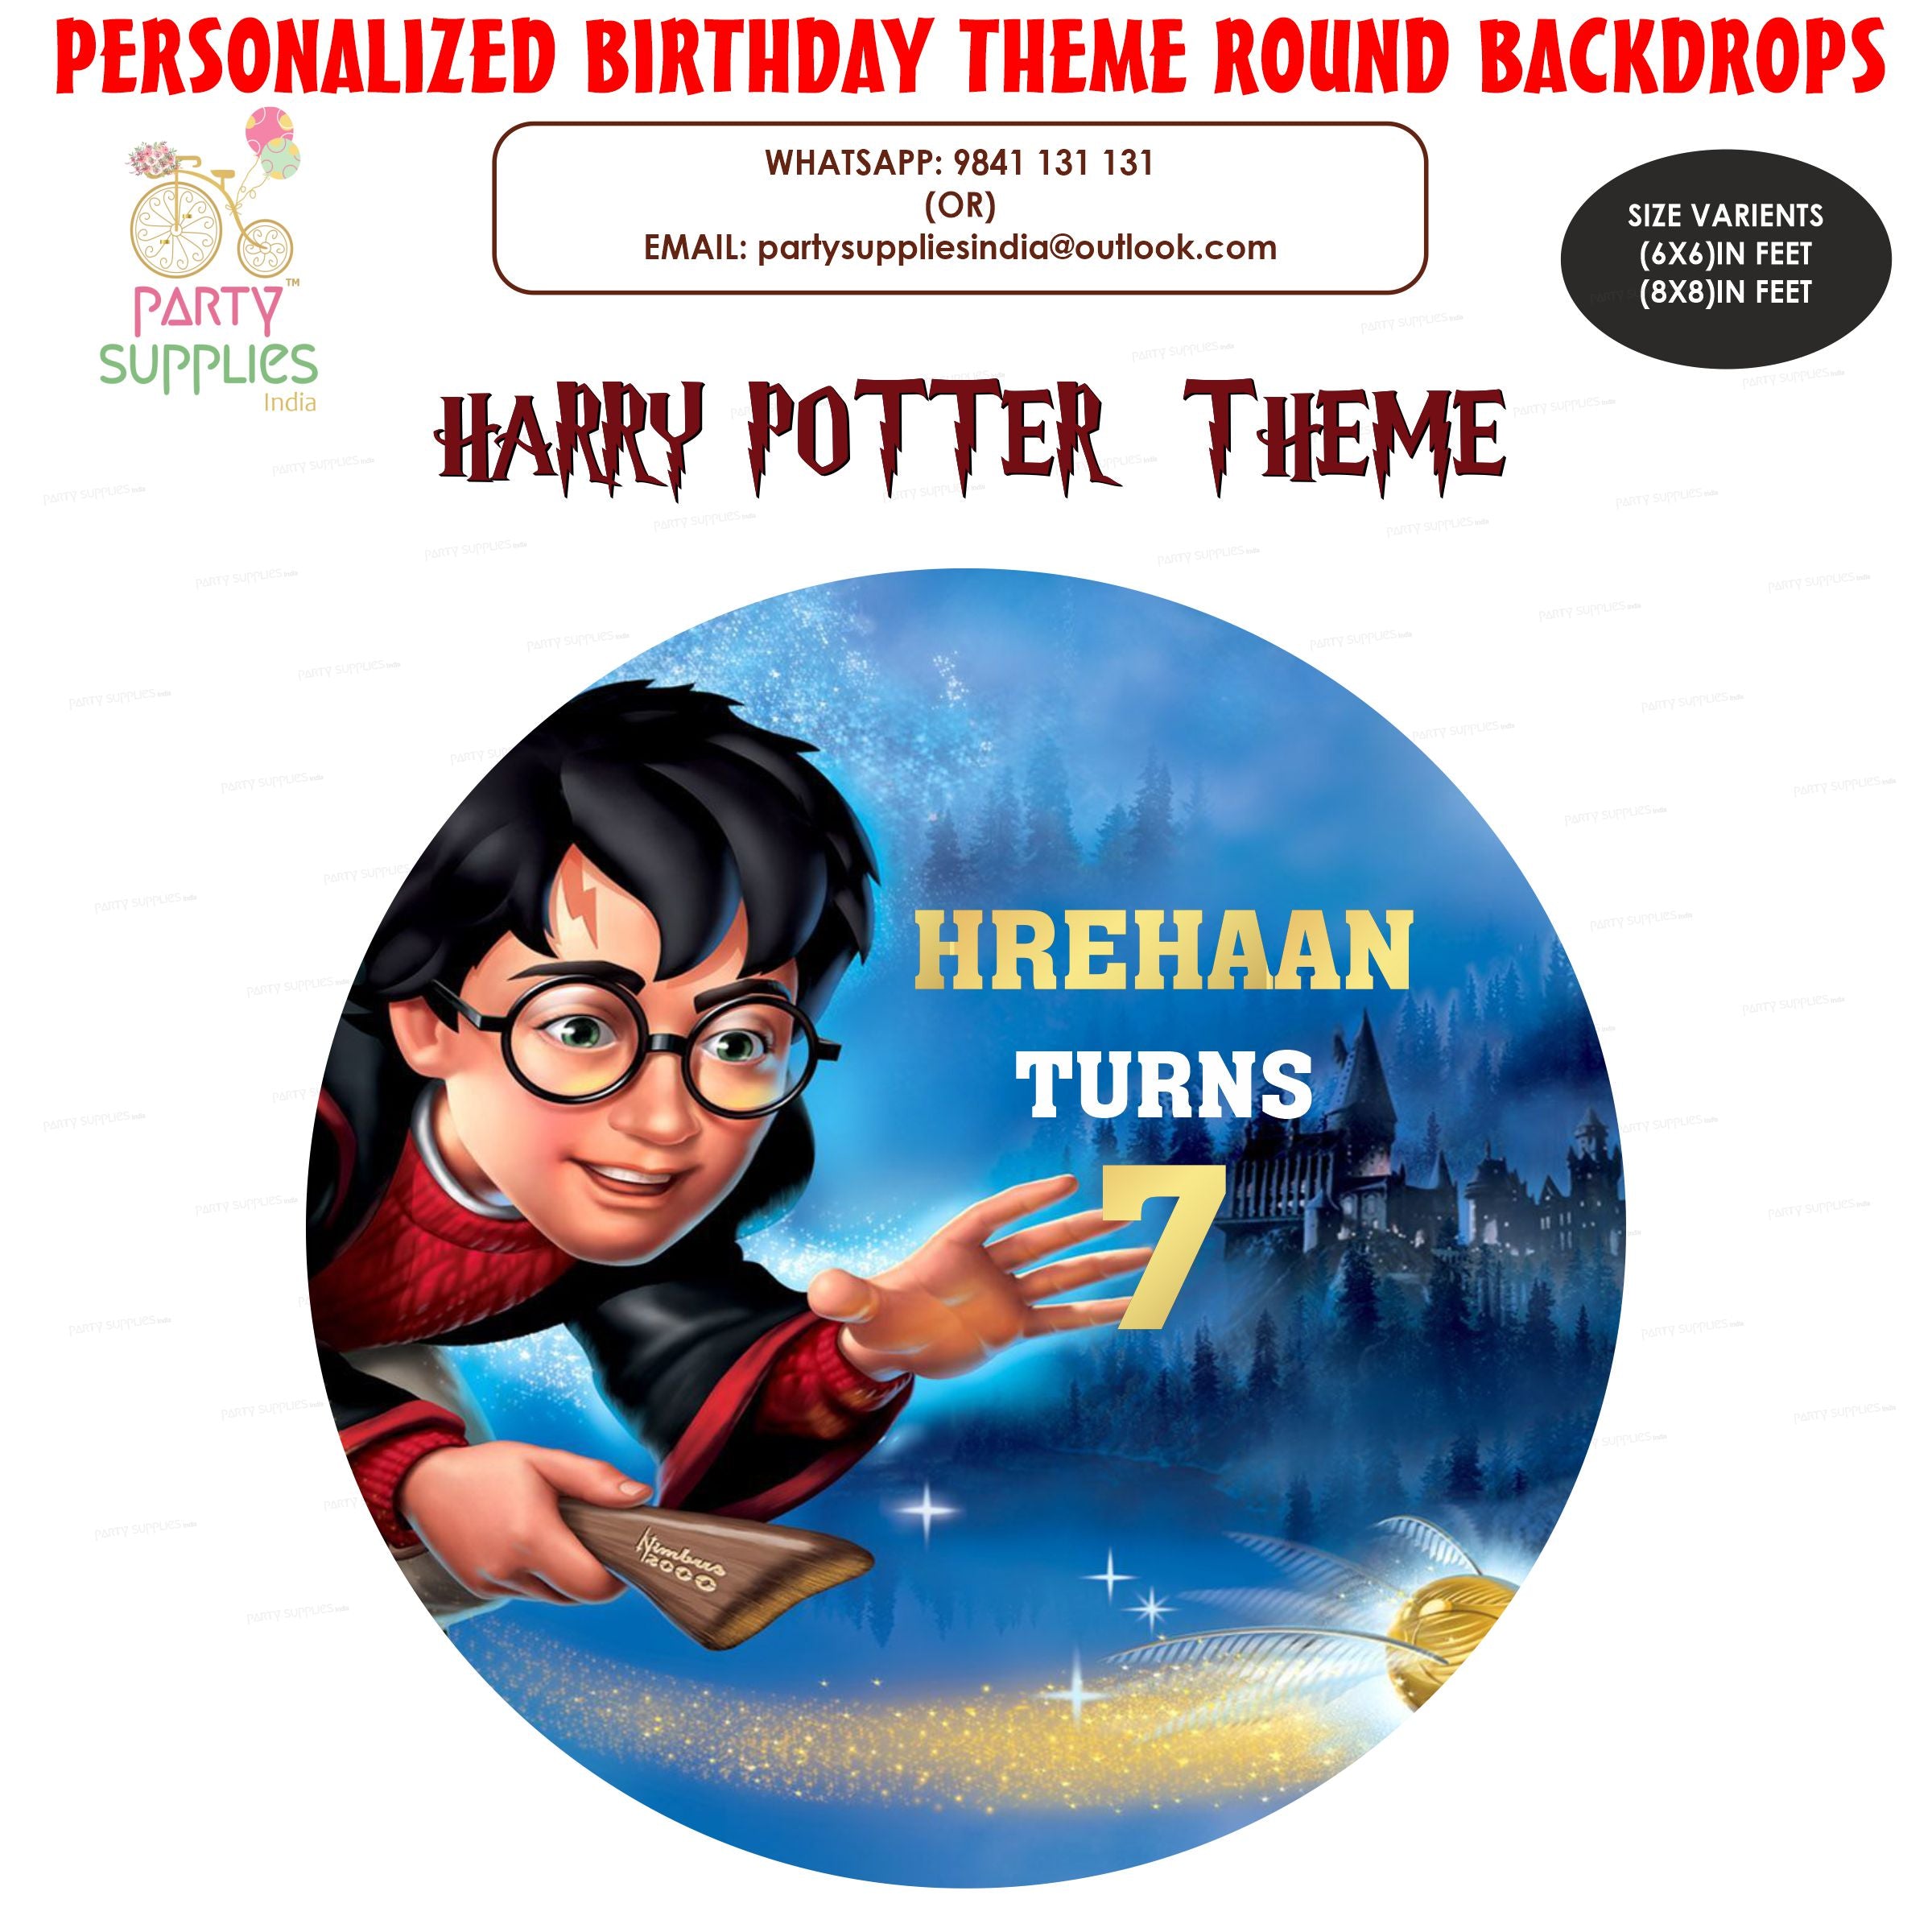 Harry Potter Theme Customized Round Backdrop  Kids birthday party – Party  Supplies India